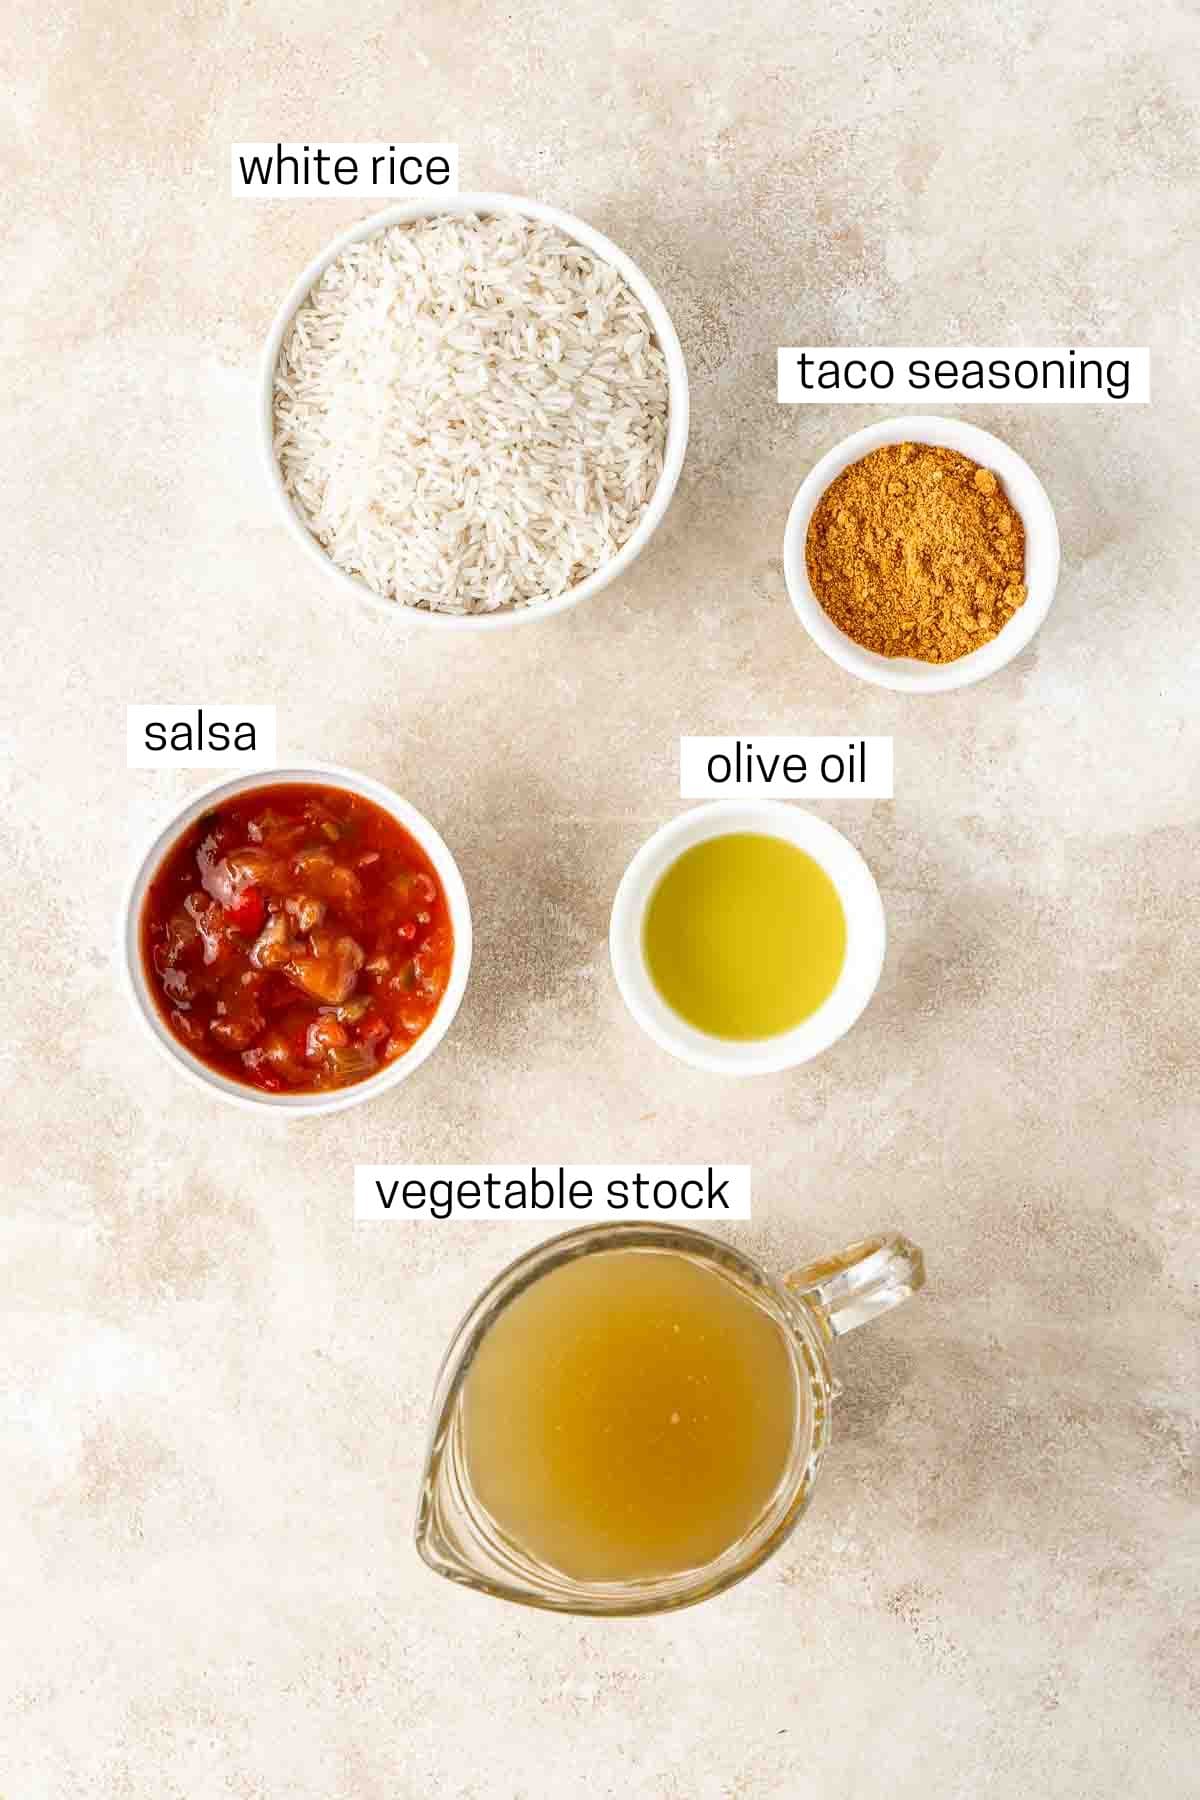 All ingredients needed to make Mexican rice in the rice cooker.